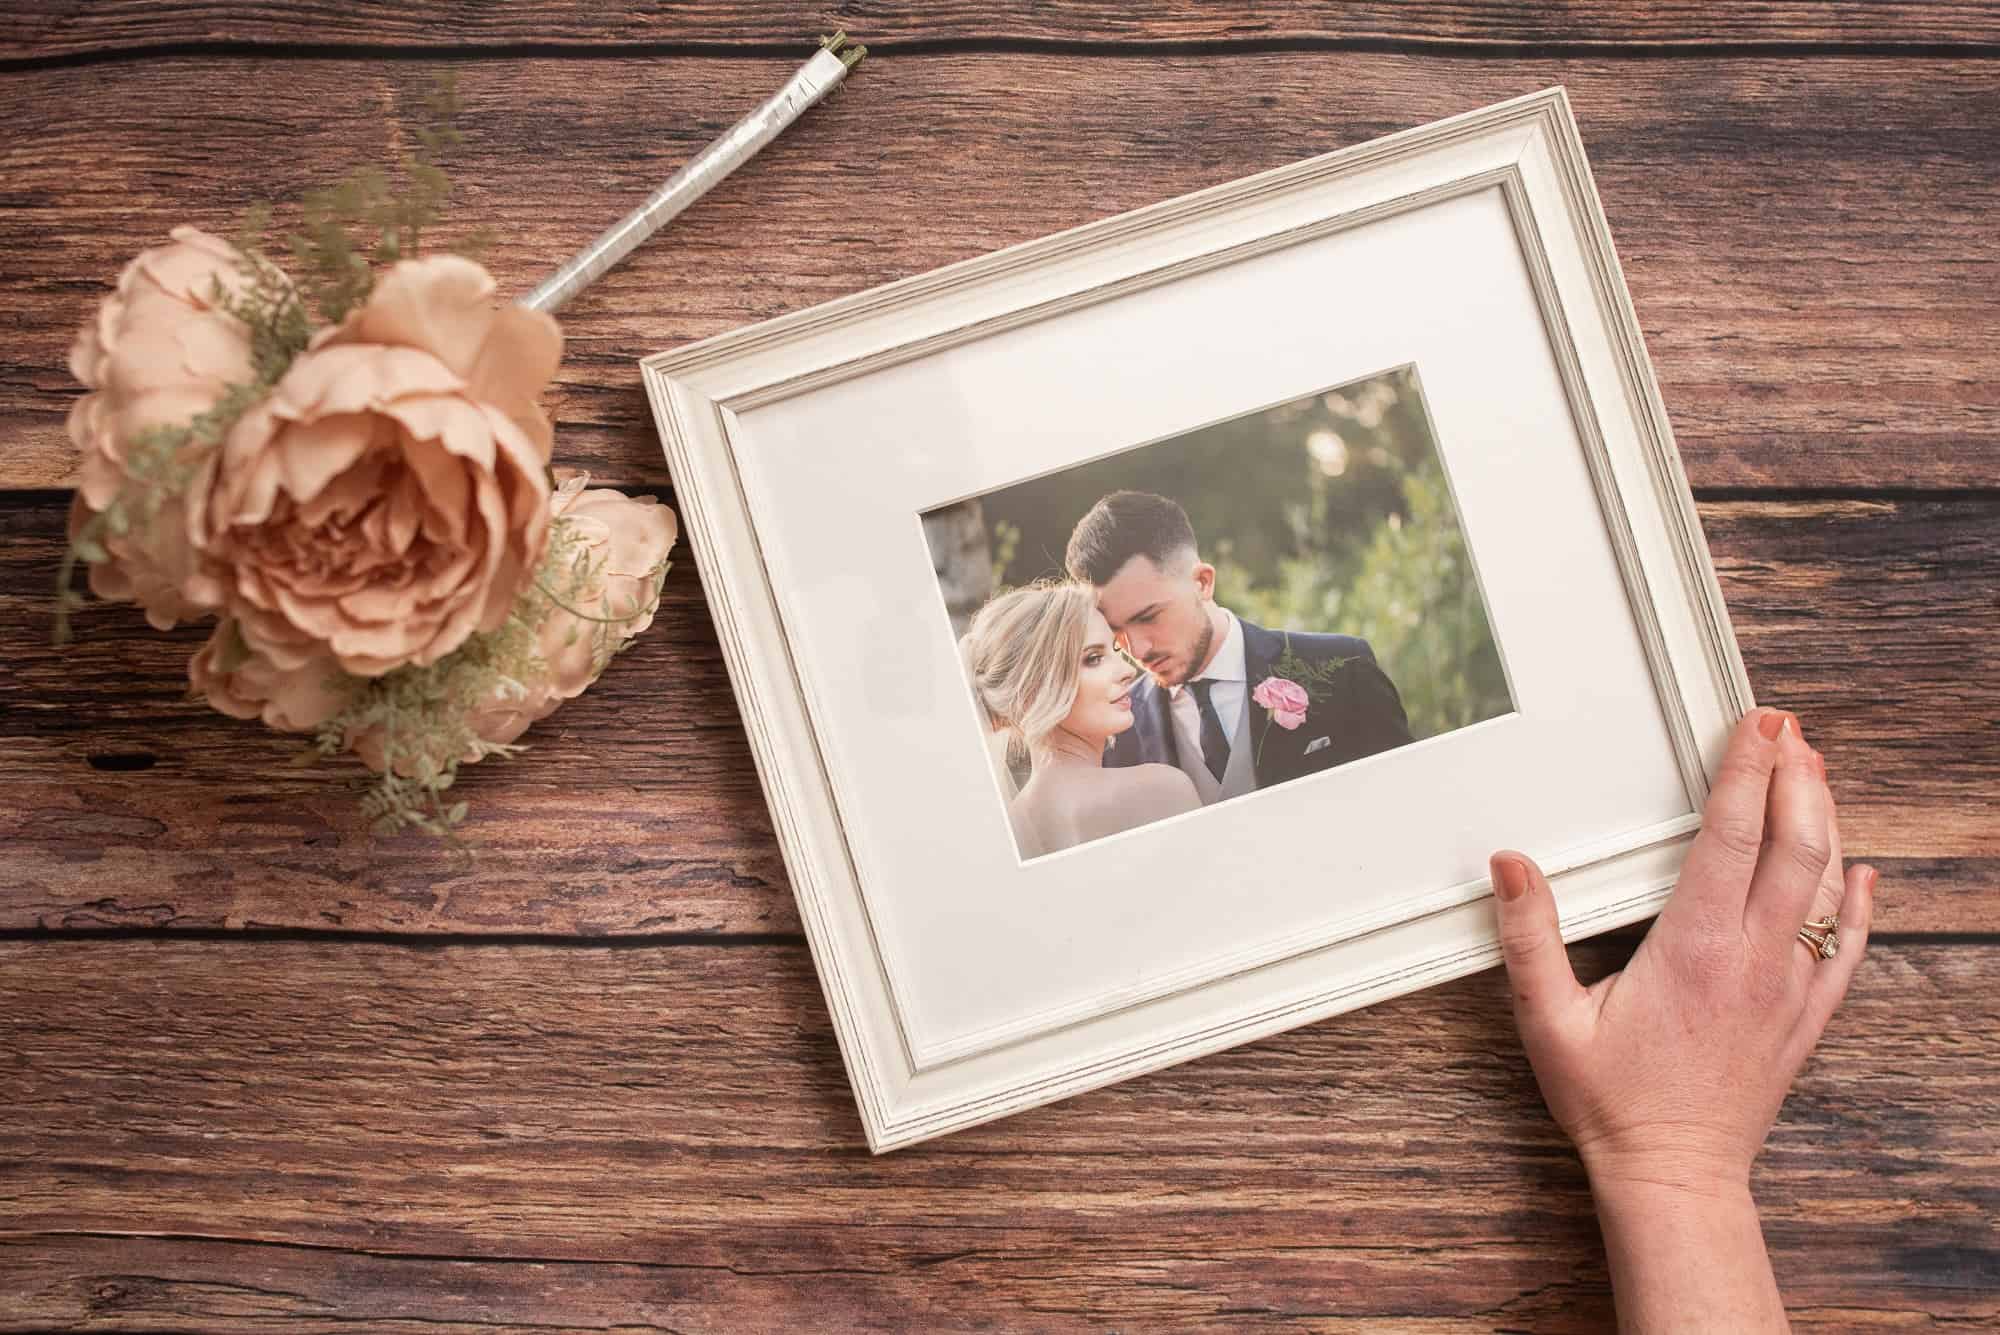 Framed products, bespoke chevrons and prints, framed of your favourite wedding photos and family image